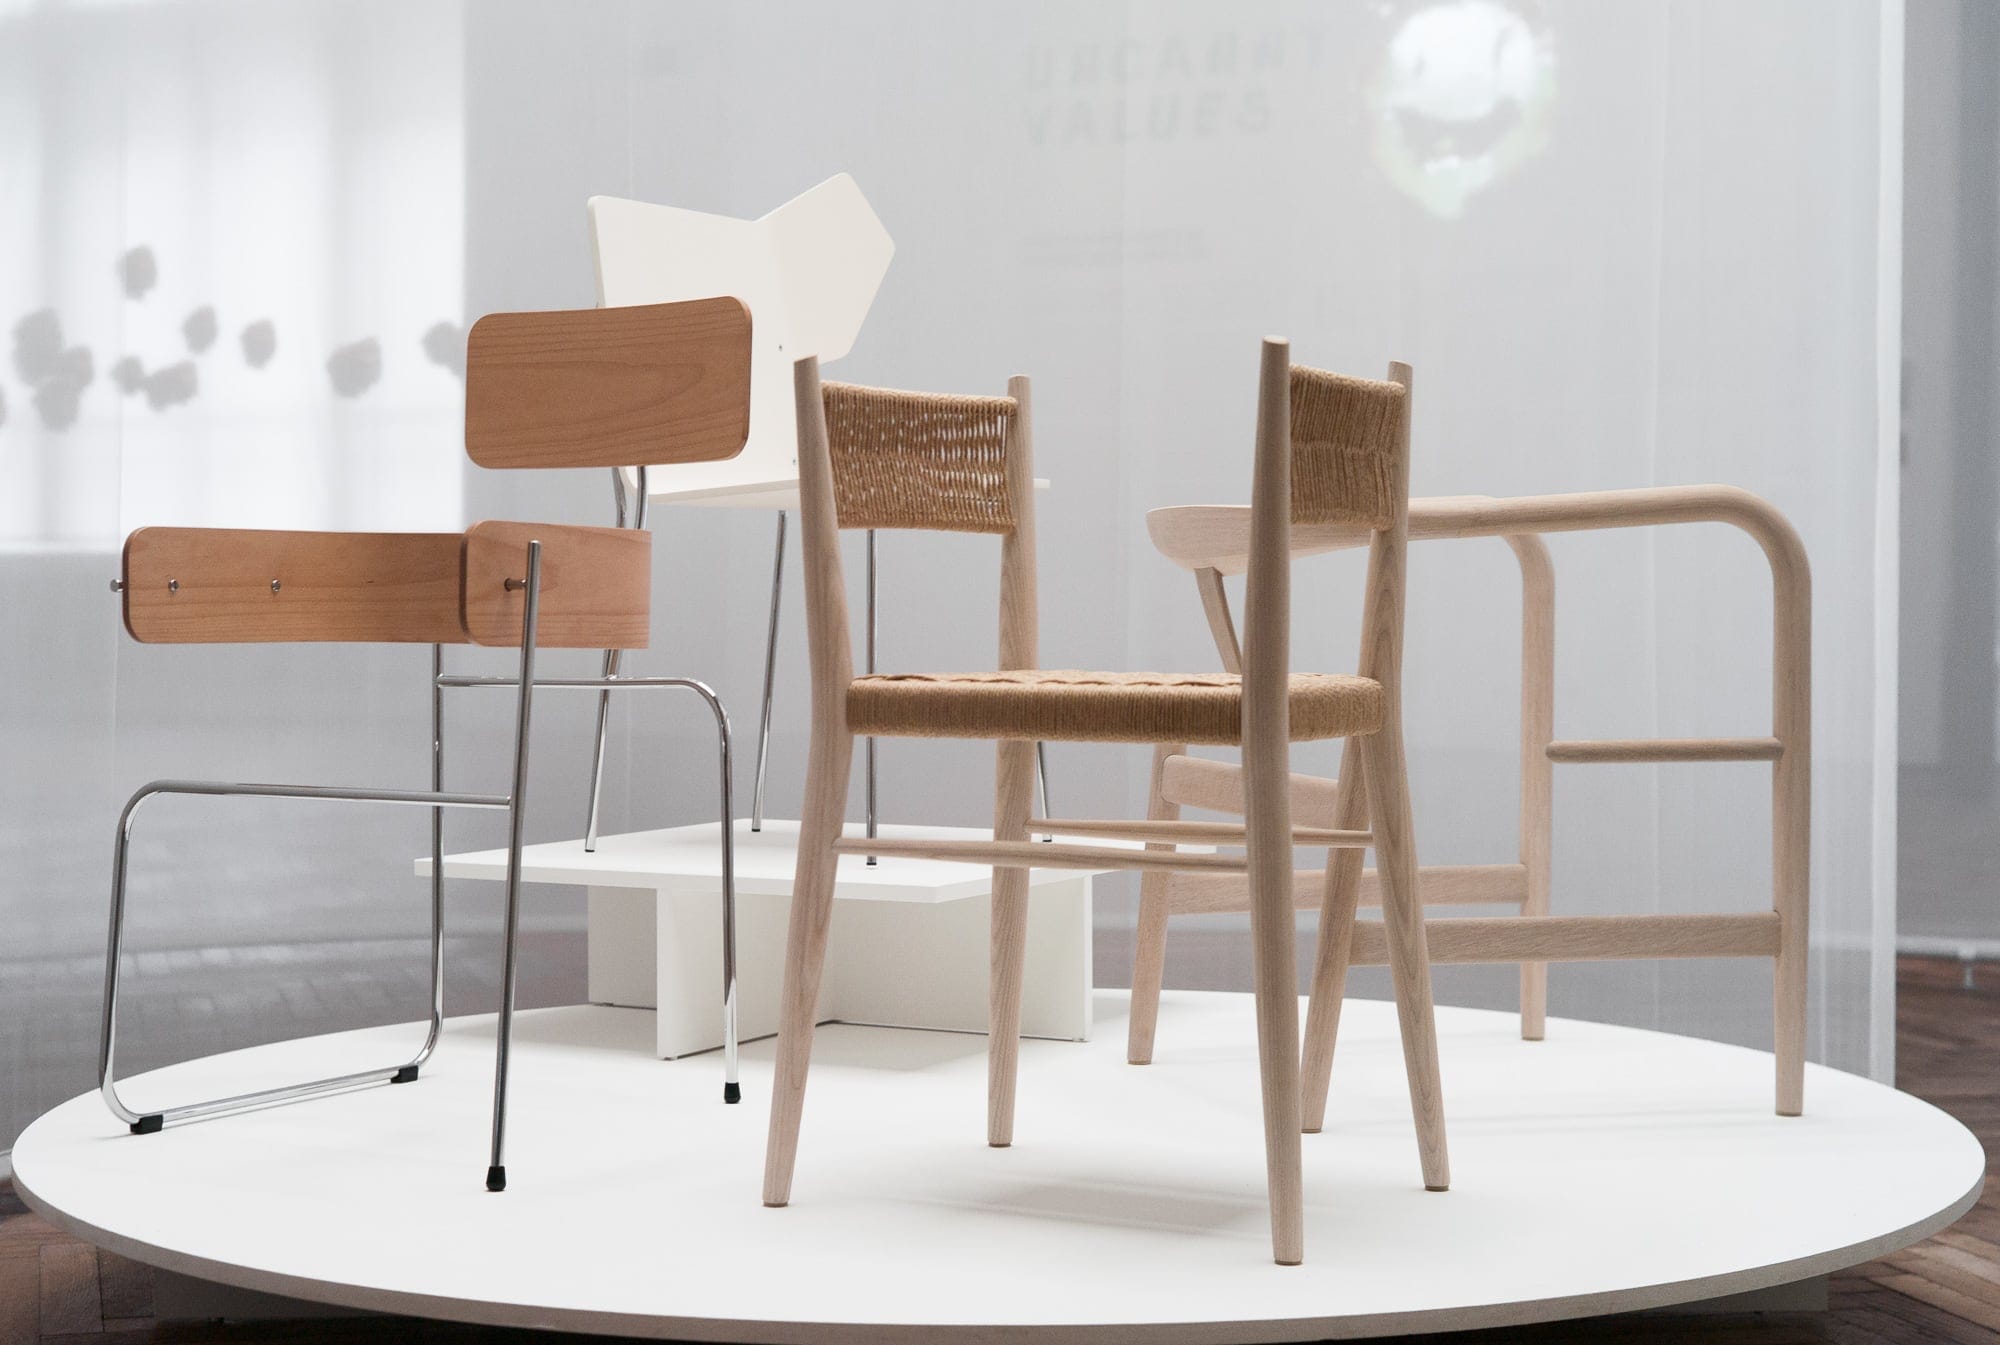 The Chair Project (Four Classics) at Uncanny Values, MAK Vienna